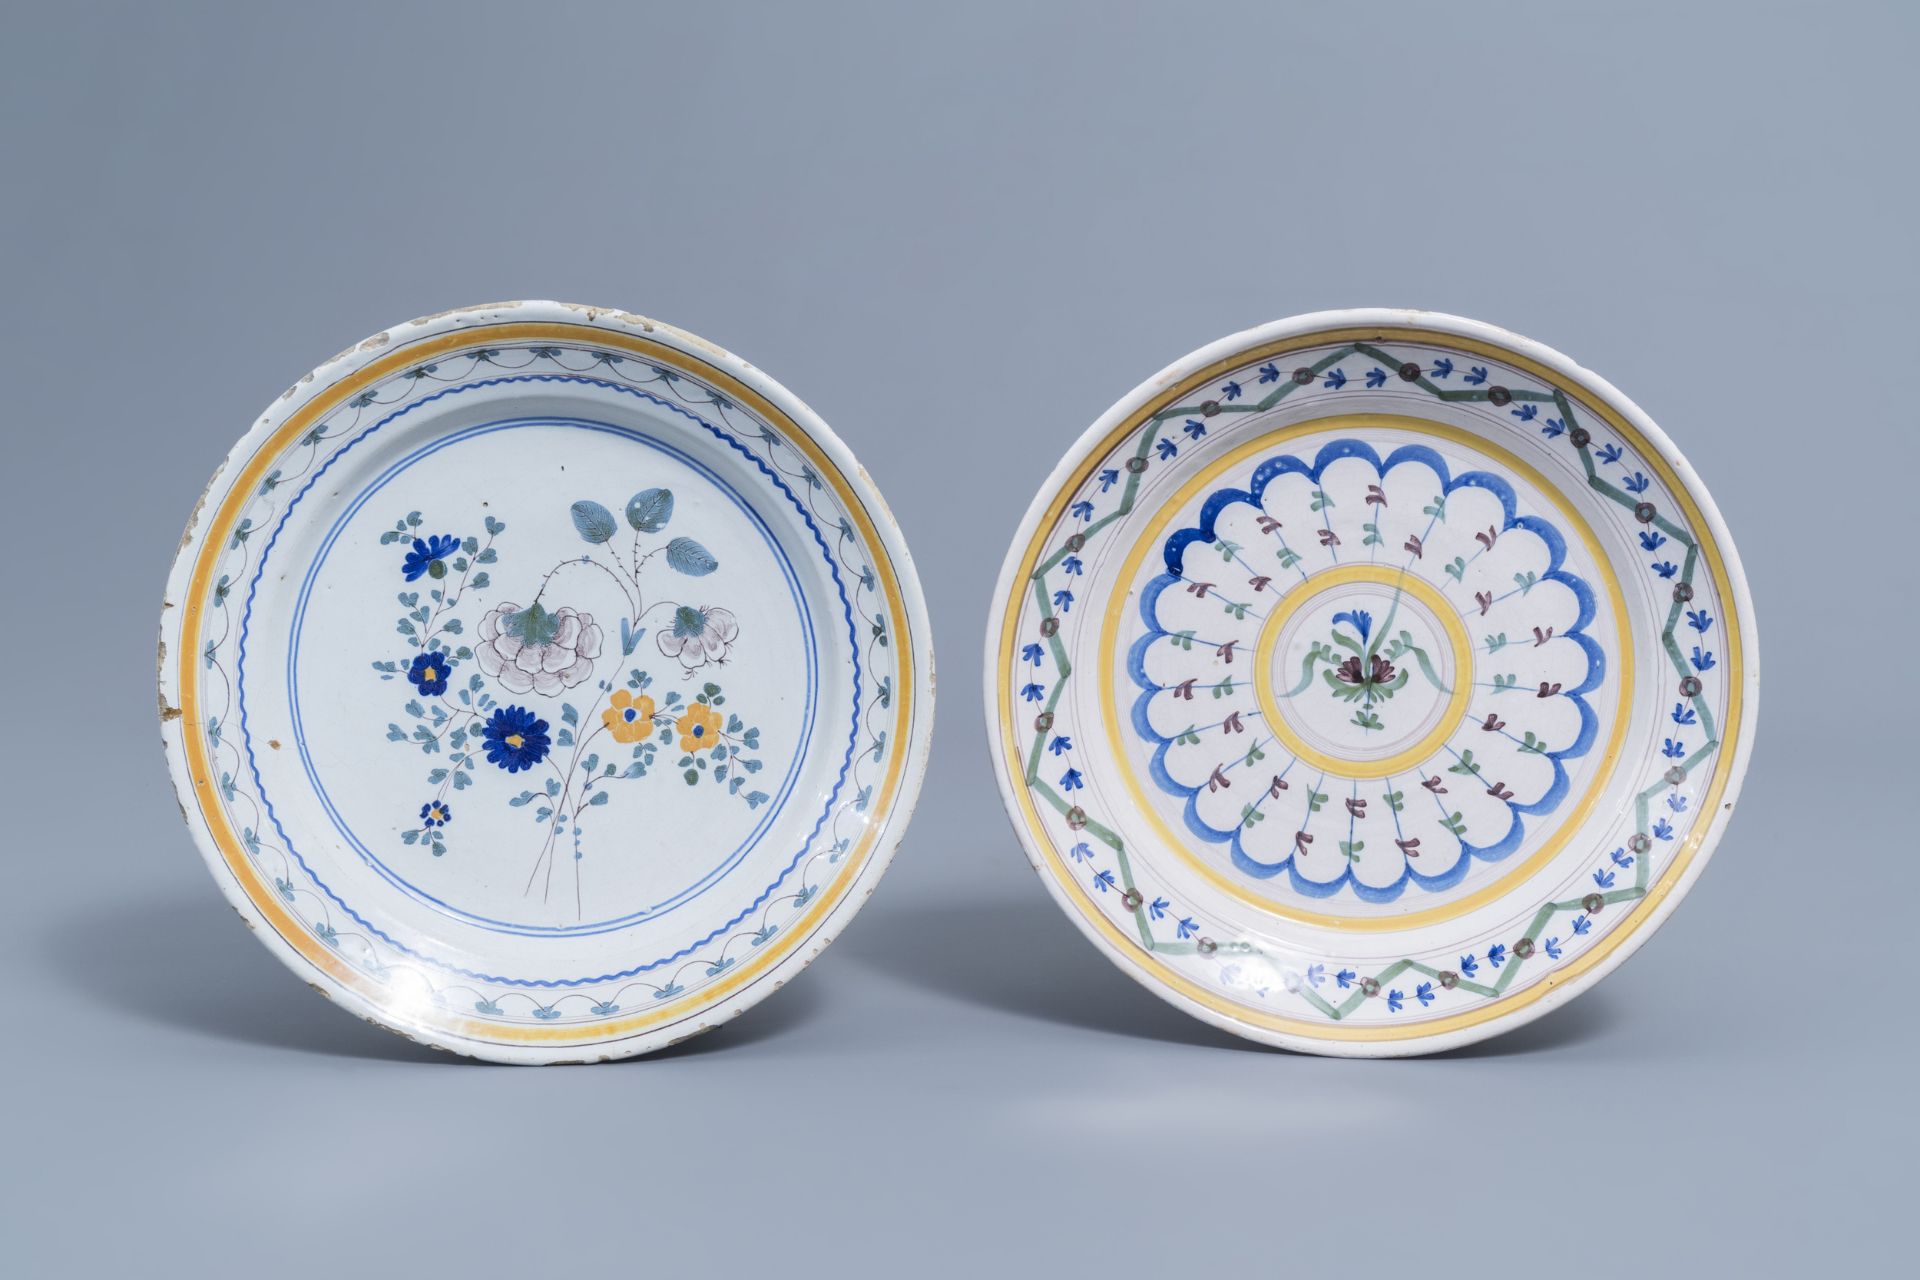 Five polychrome Brussels faience plates with floral design, 18th/19th C. - Image 8 of 12